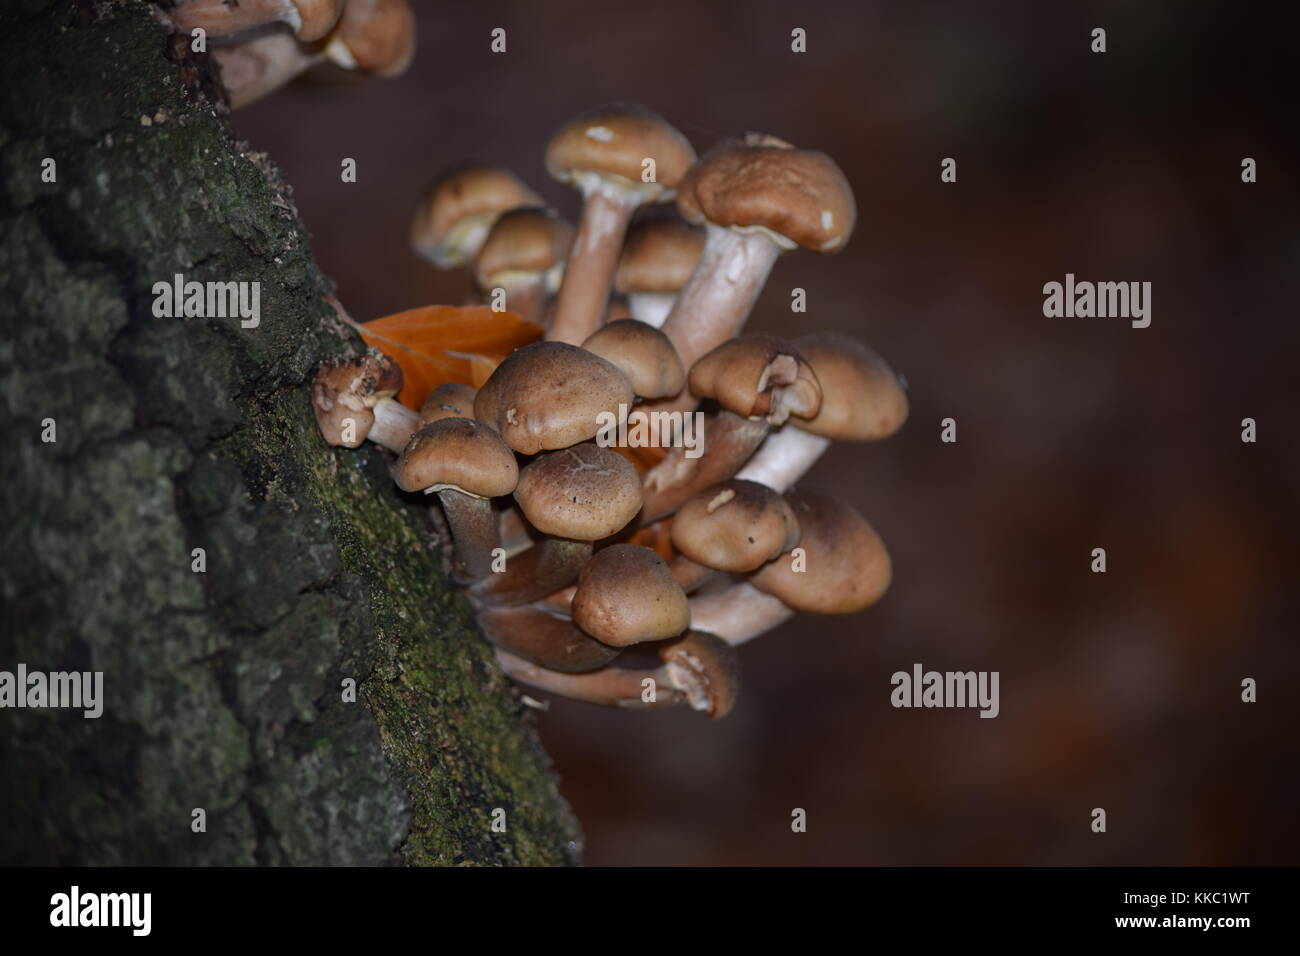 Fungus Funghi Growing on Tree Trunk Stock Photo